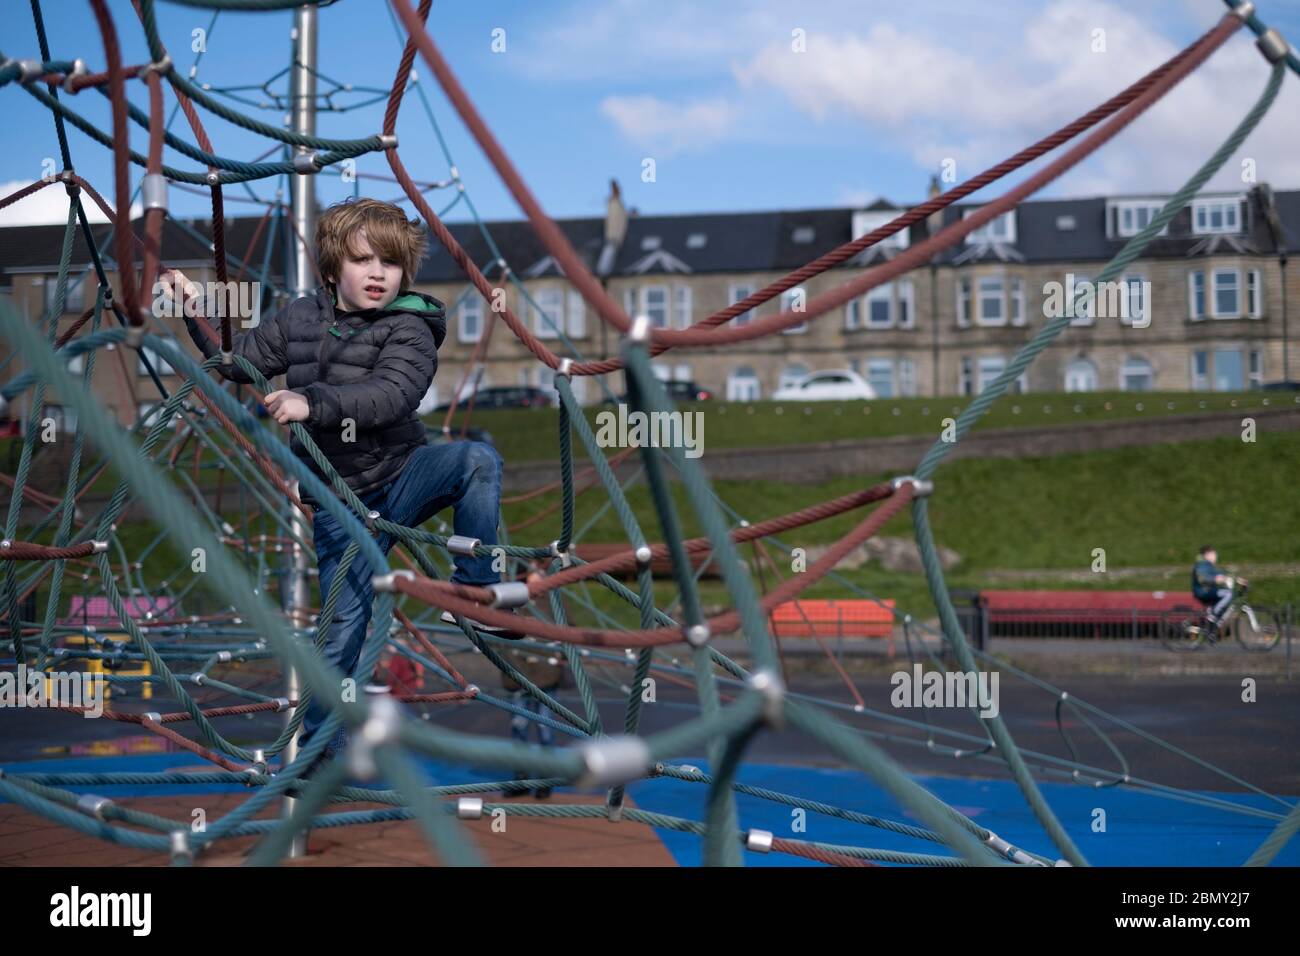 A young boy playing on a climbing frame. Stock Photo